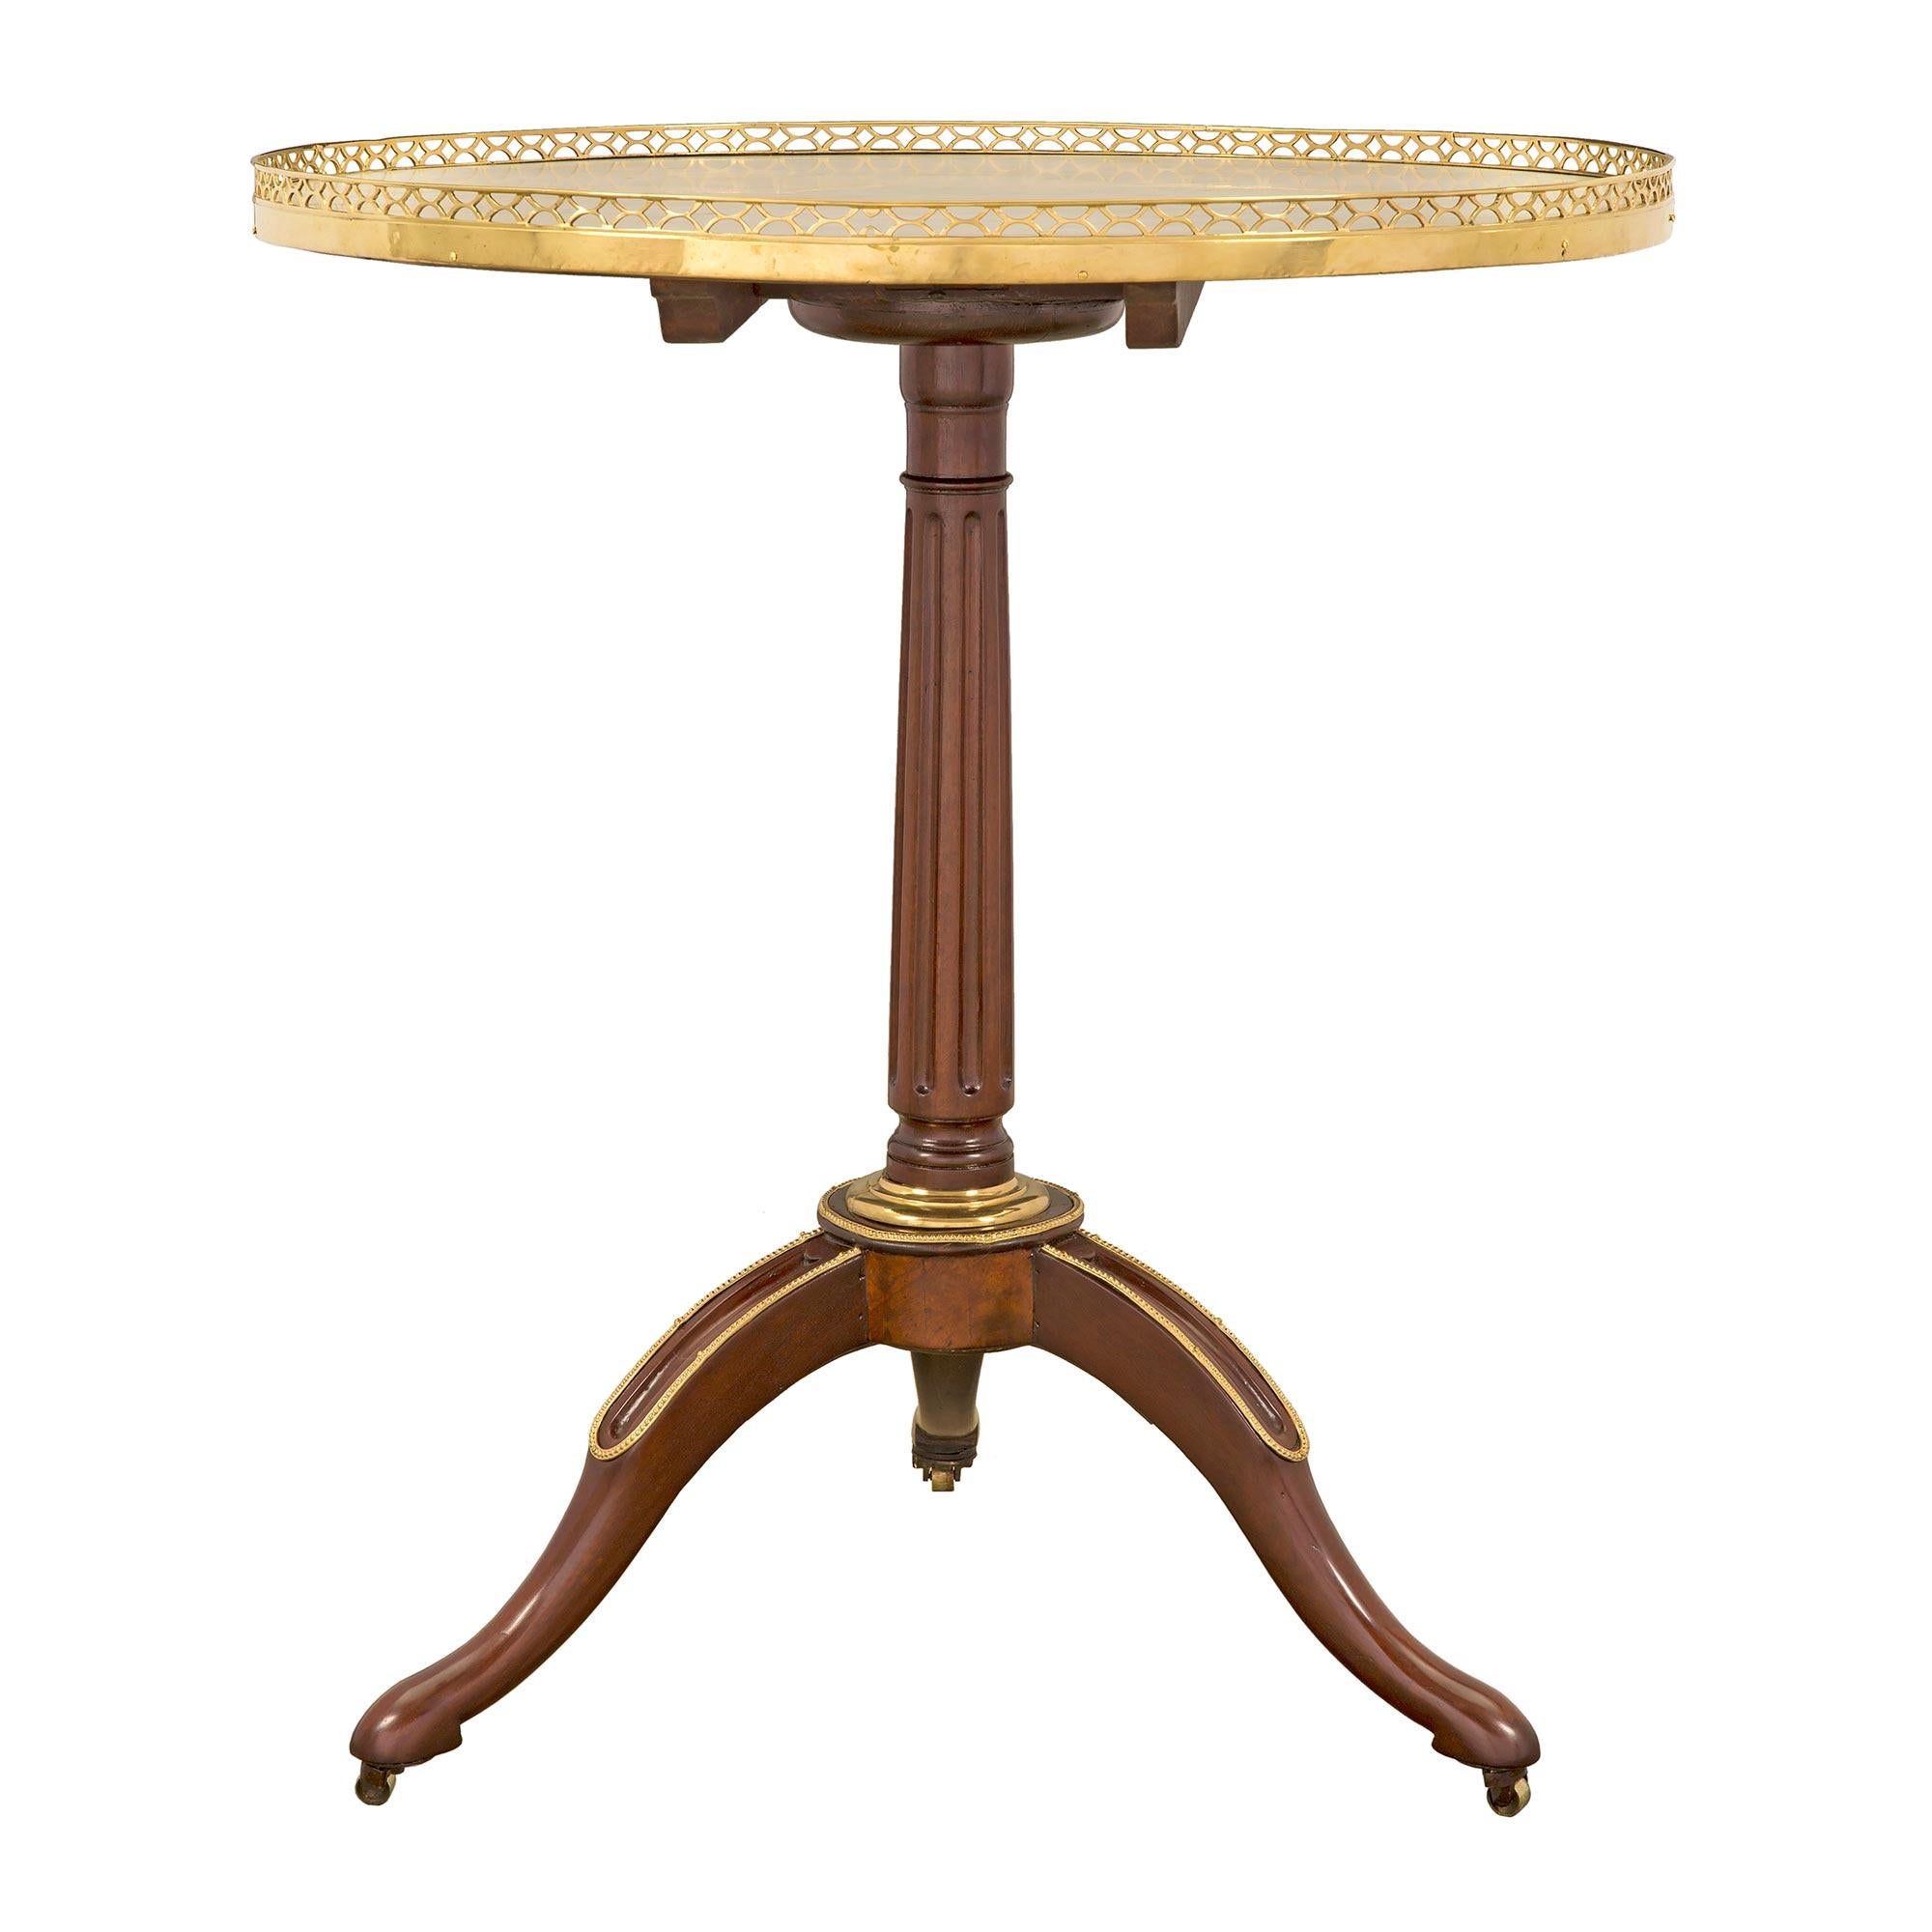 French 18th Century Louis XVI Period Mahogany, Ormolu and Marble Side Table For Sale 1